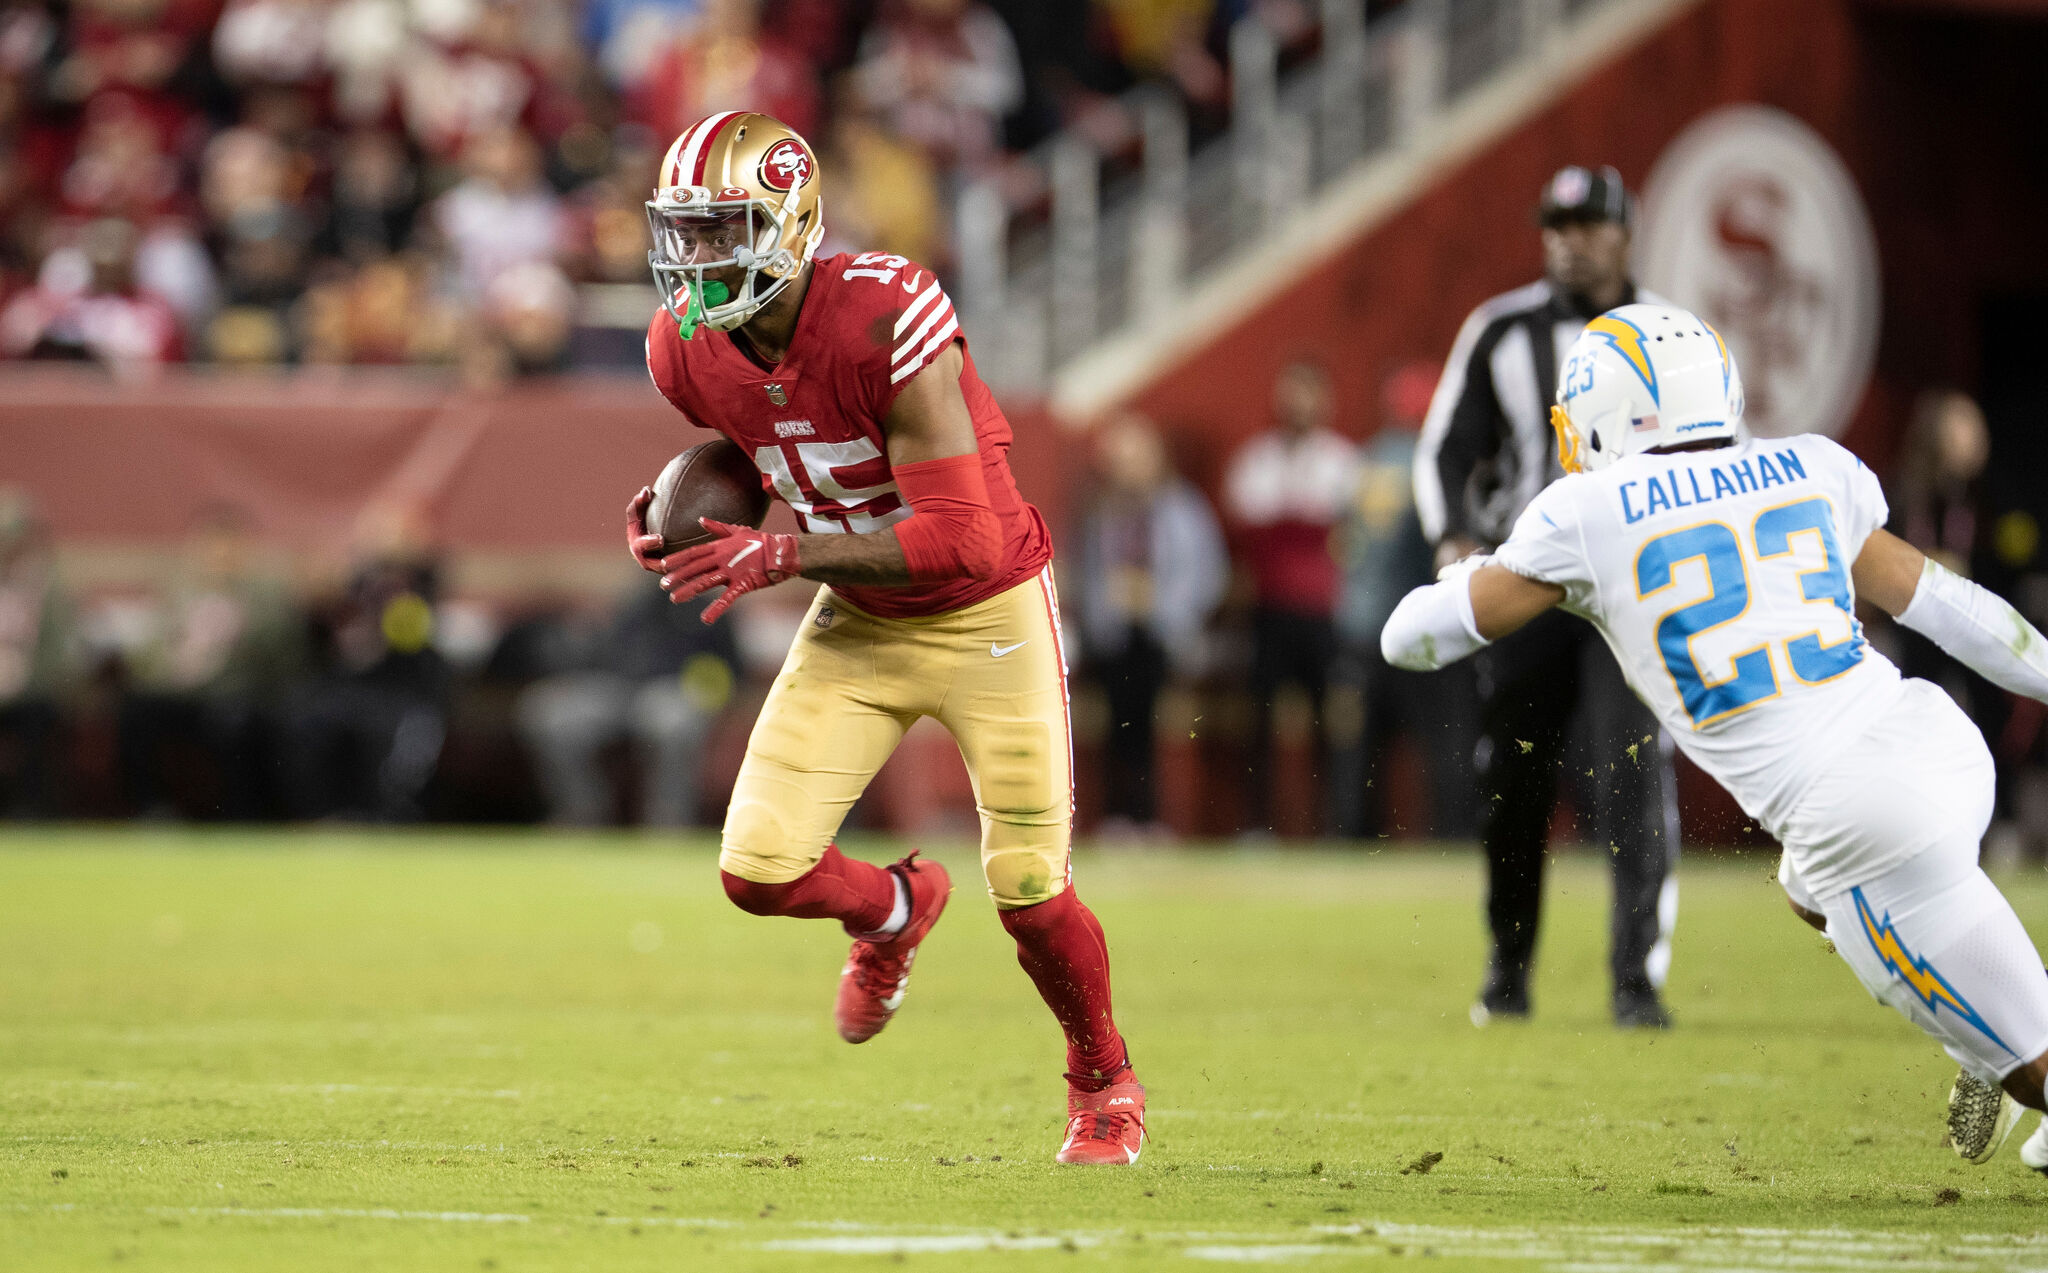 How to watch 49ers vs. Chargers NFL preseason game